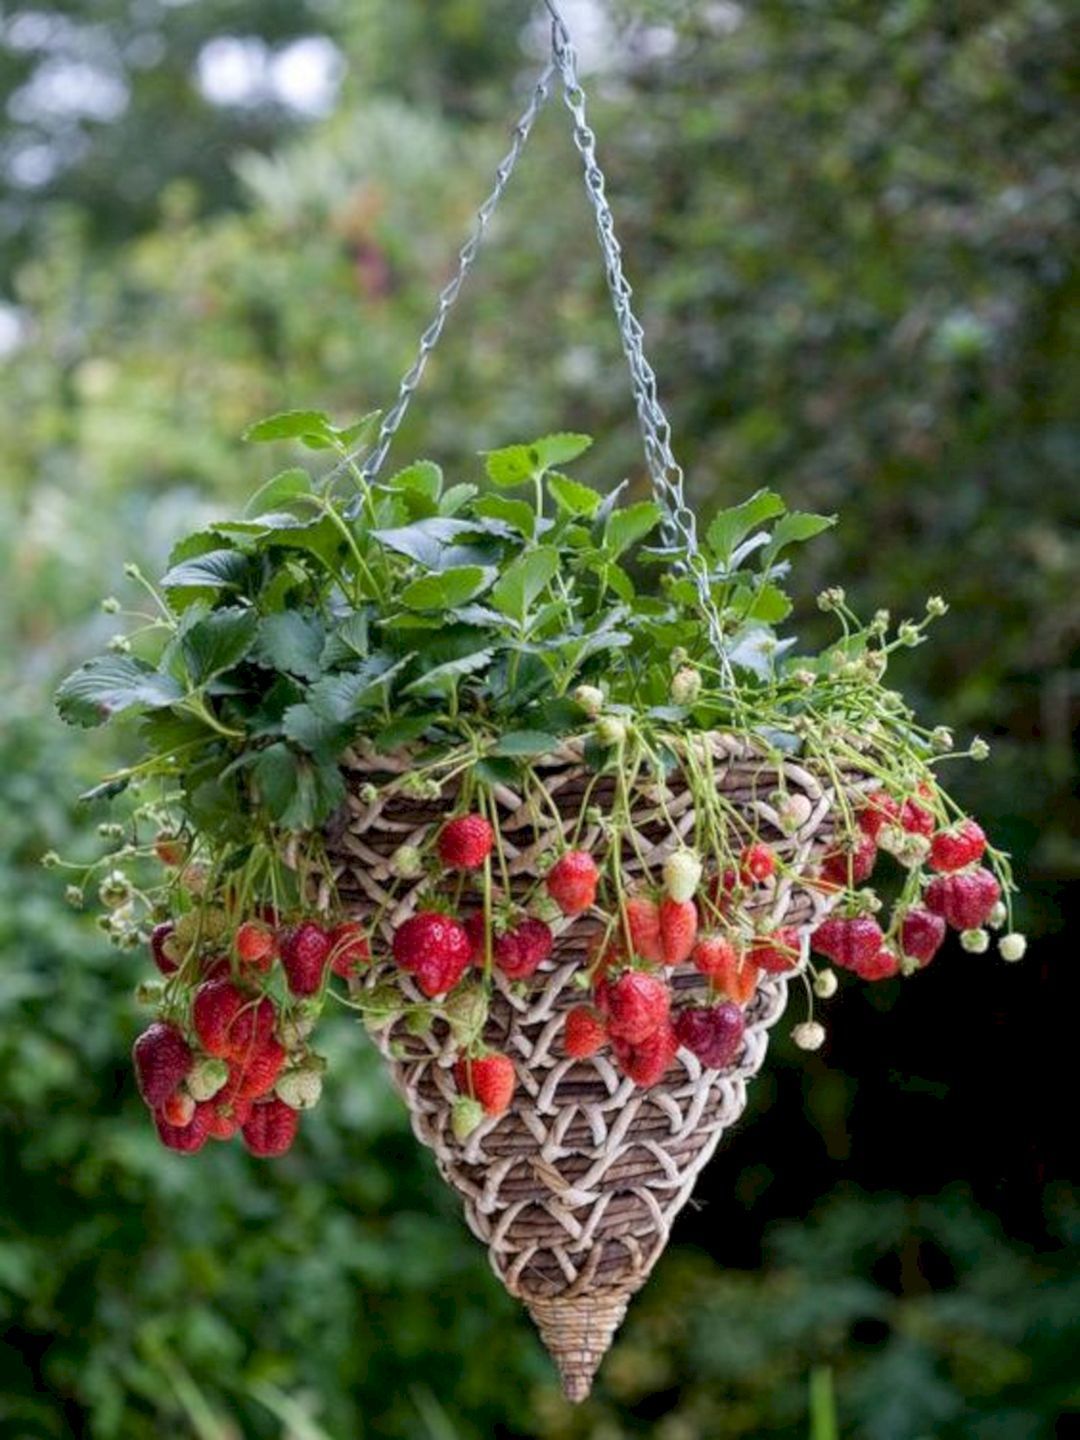 “From Garden to Cup: The Sweet and Healthy Benefits of Growing and Using Strawberries!”